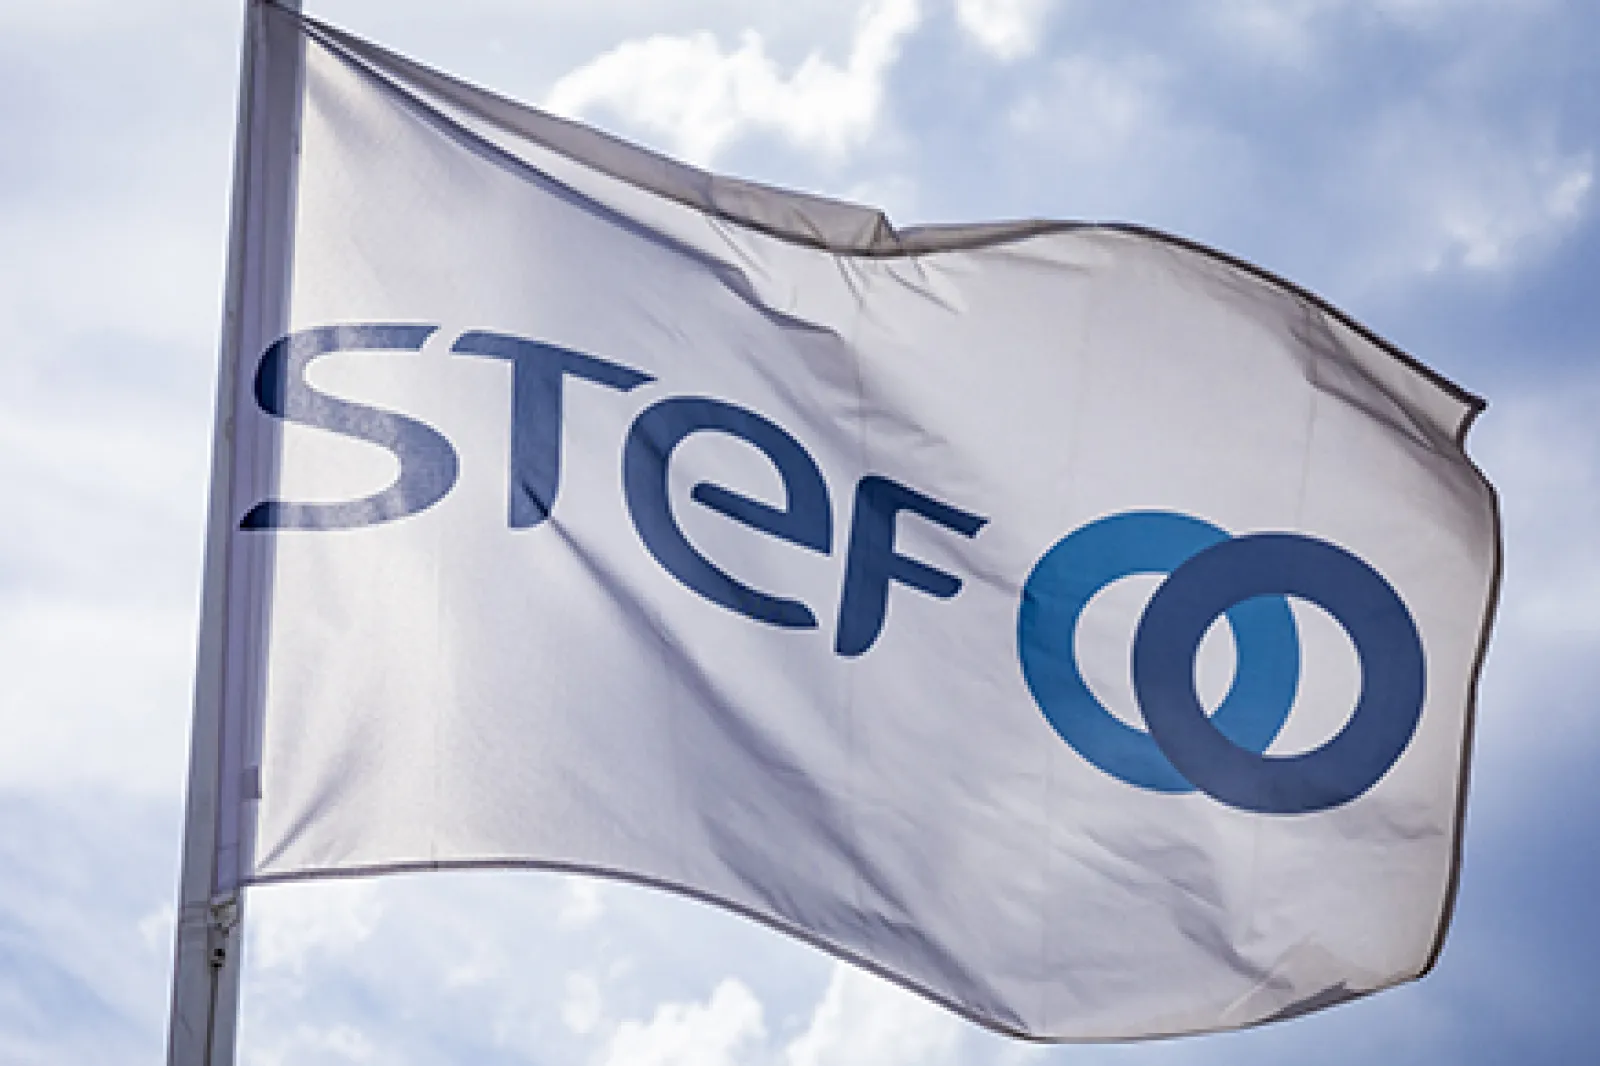 Q2 2019: STEF announces sustained growth   